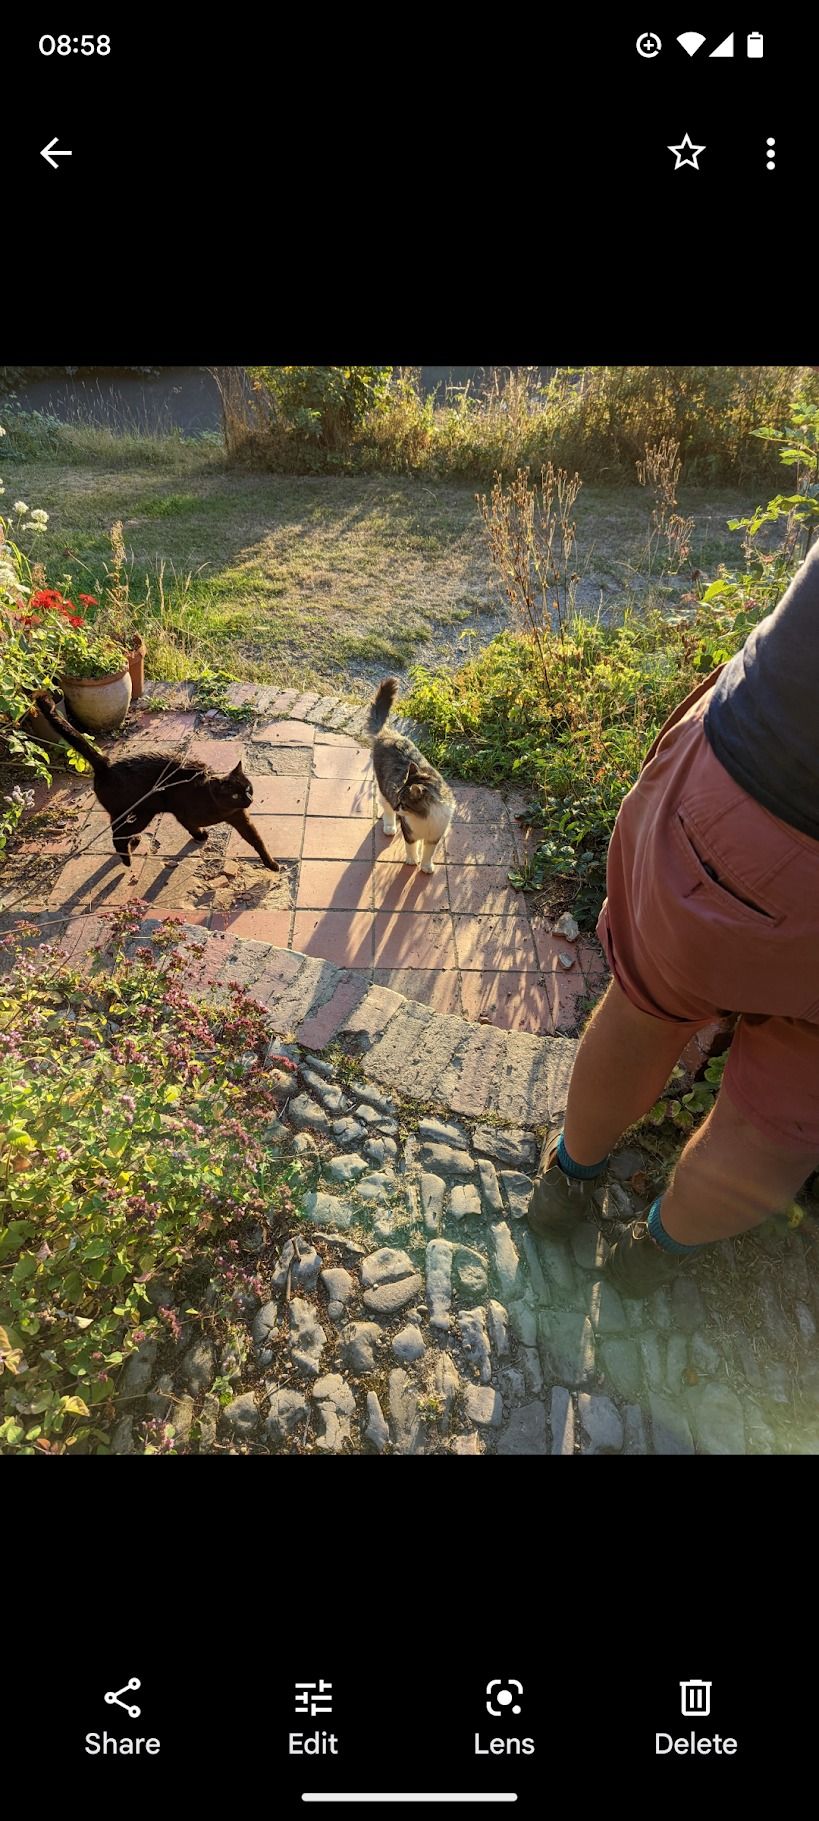 black cat and grey cat on stone flagstones with person in orange trousers